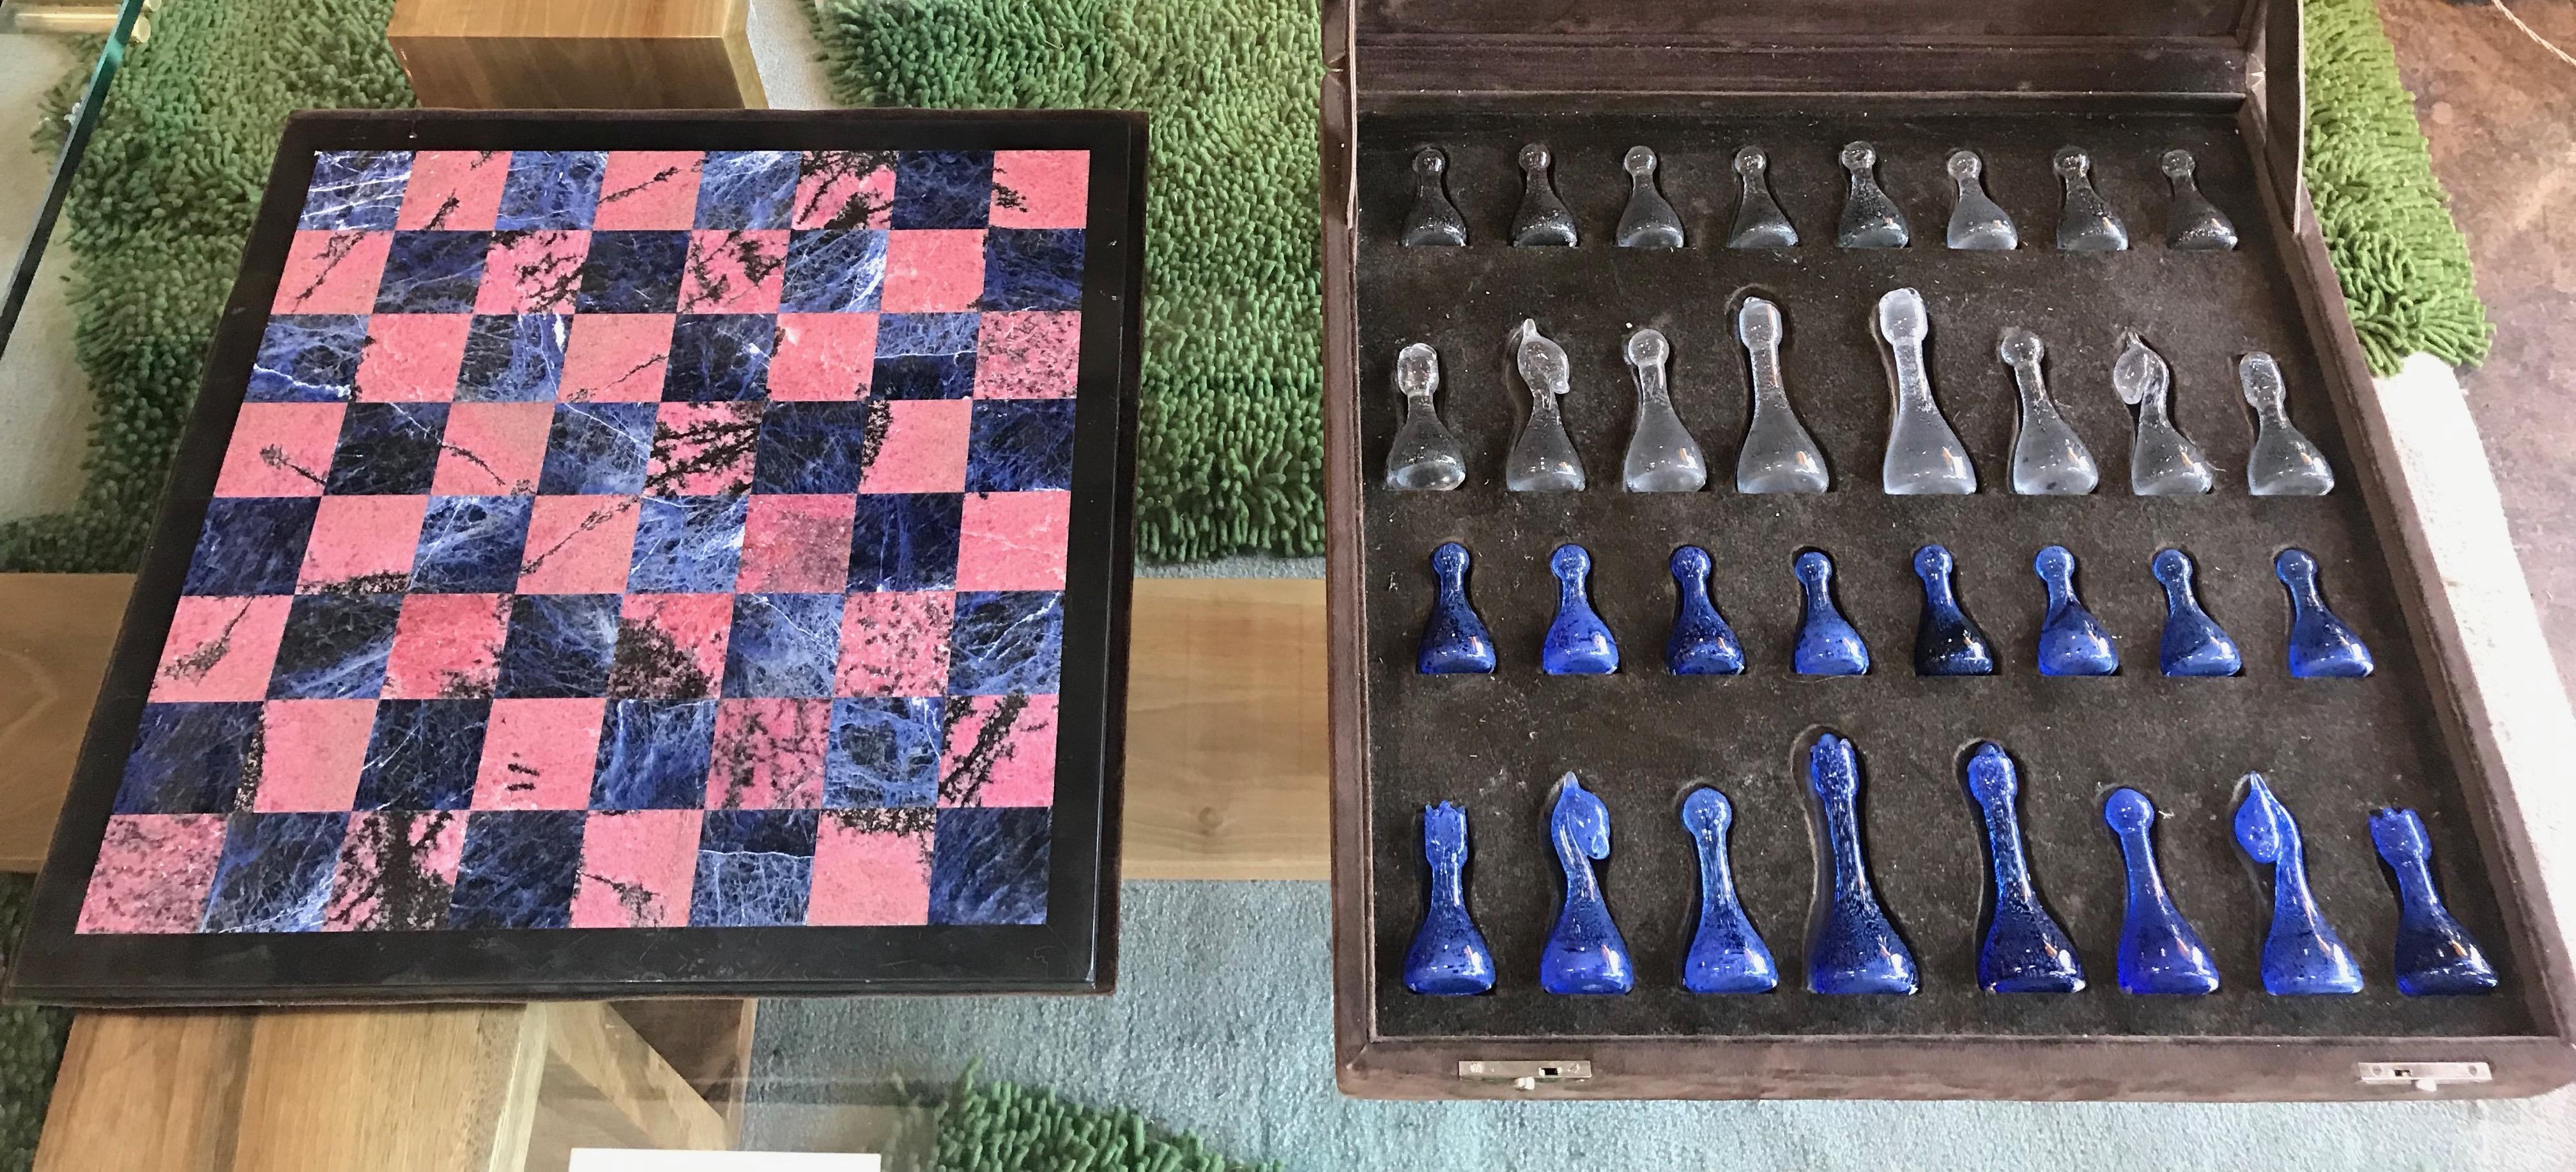 An Italian marble and art glass chess game set, circa 1960s, Italy. Marble game board has a beautiful rare blue marble colors that include: white, and a marble combo of white/blue/grey.
The game pieces are in handmade art glass. Game set comes with